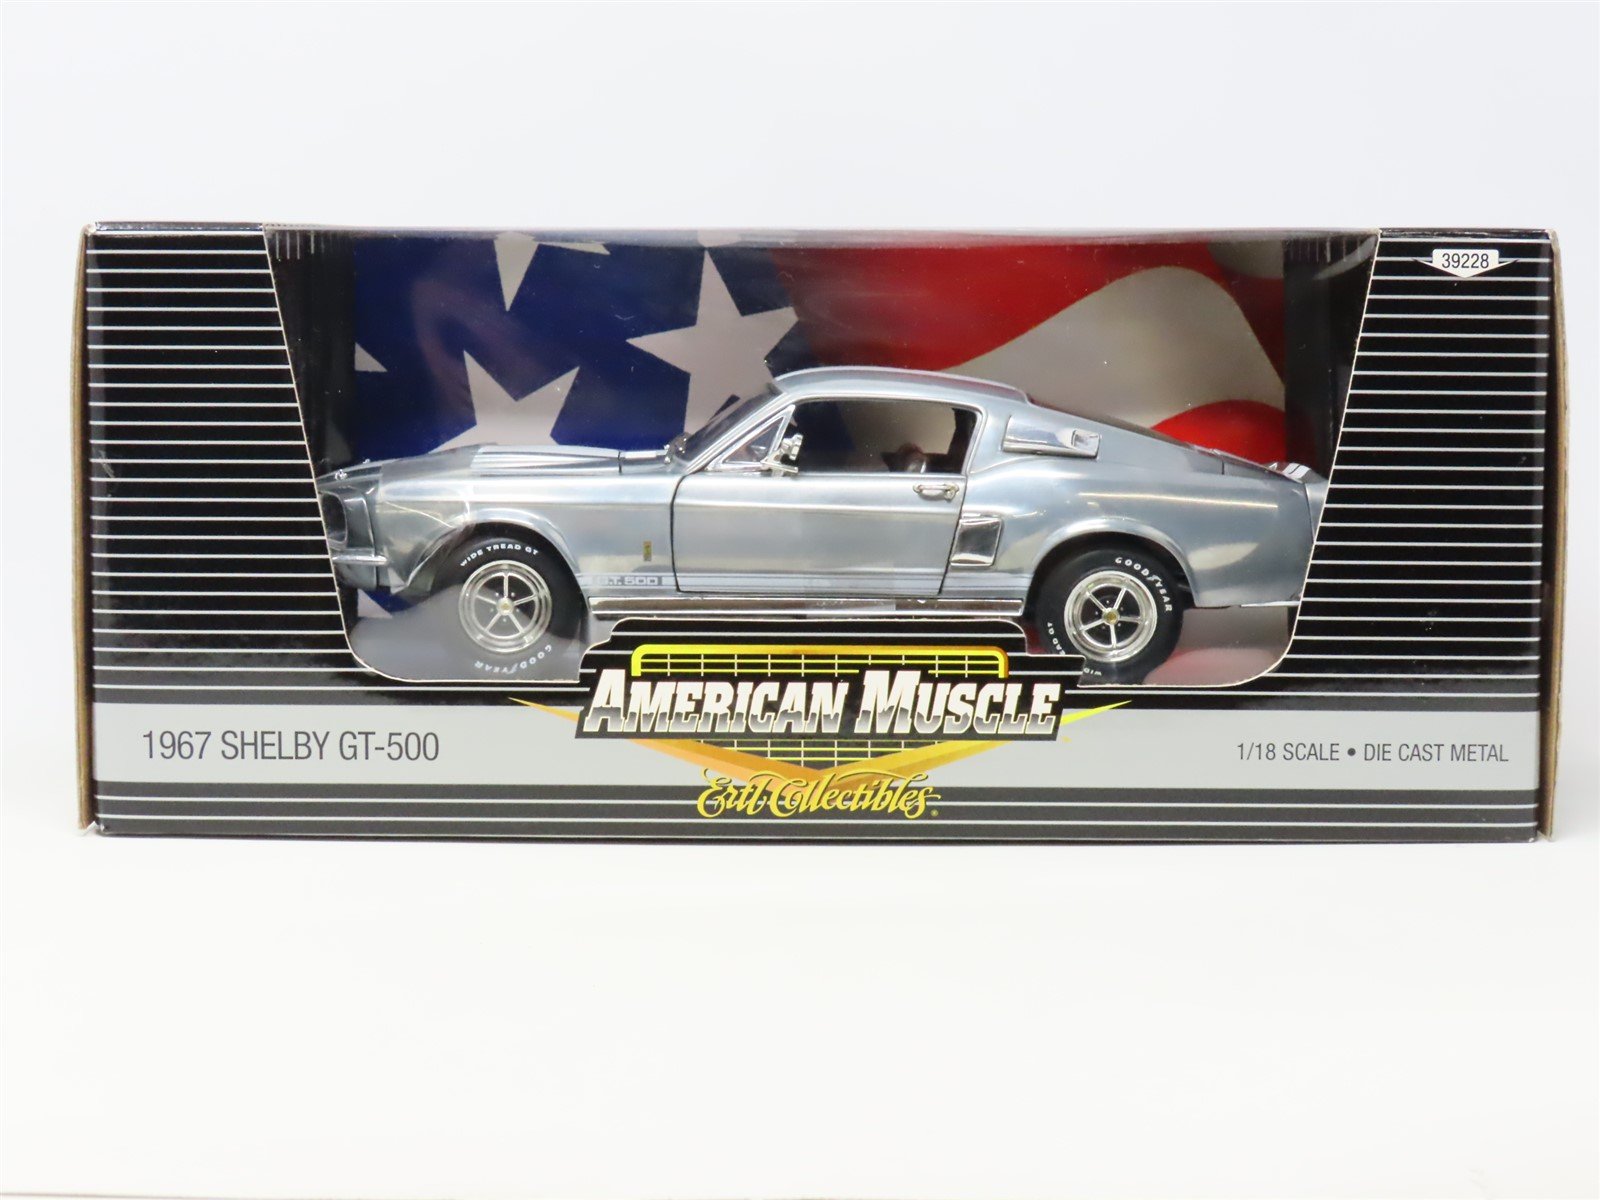 1:18 RC2 ERTL American Muscle 39228 1967 Shelby GT-500